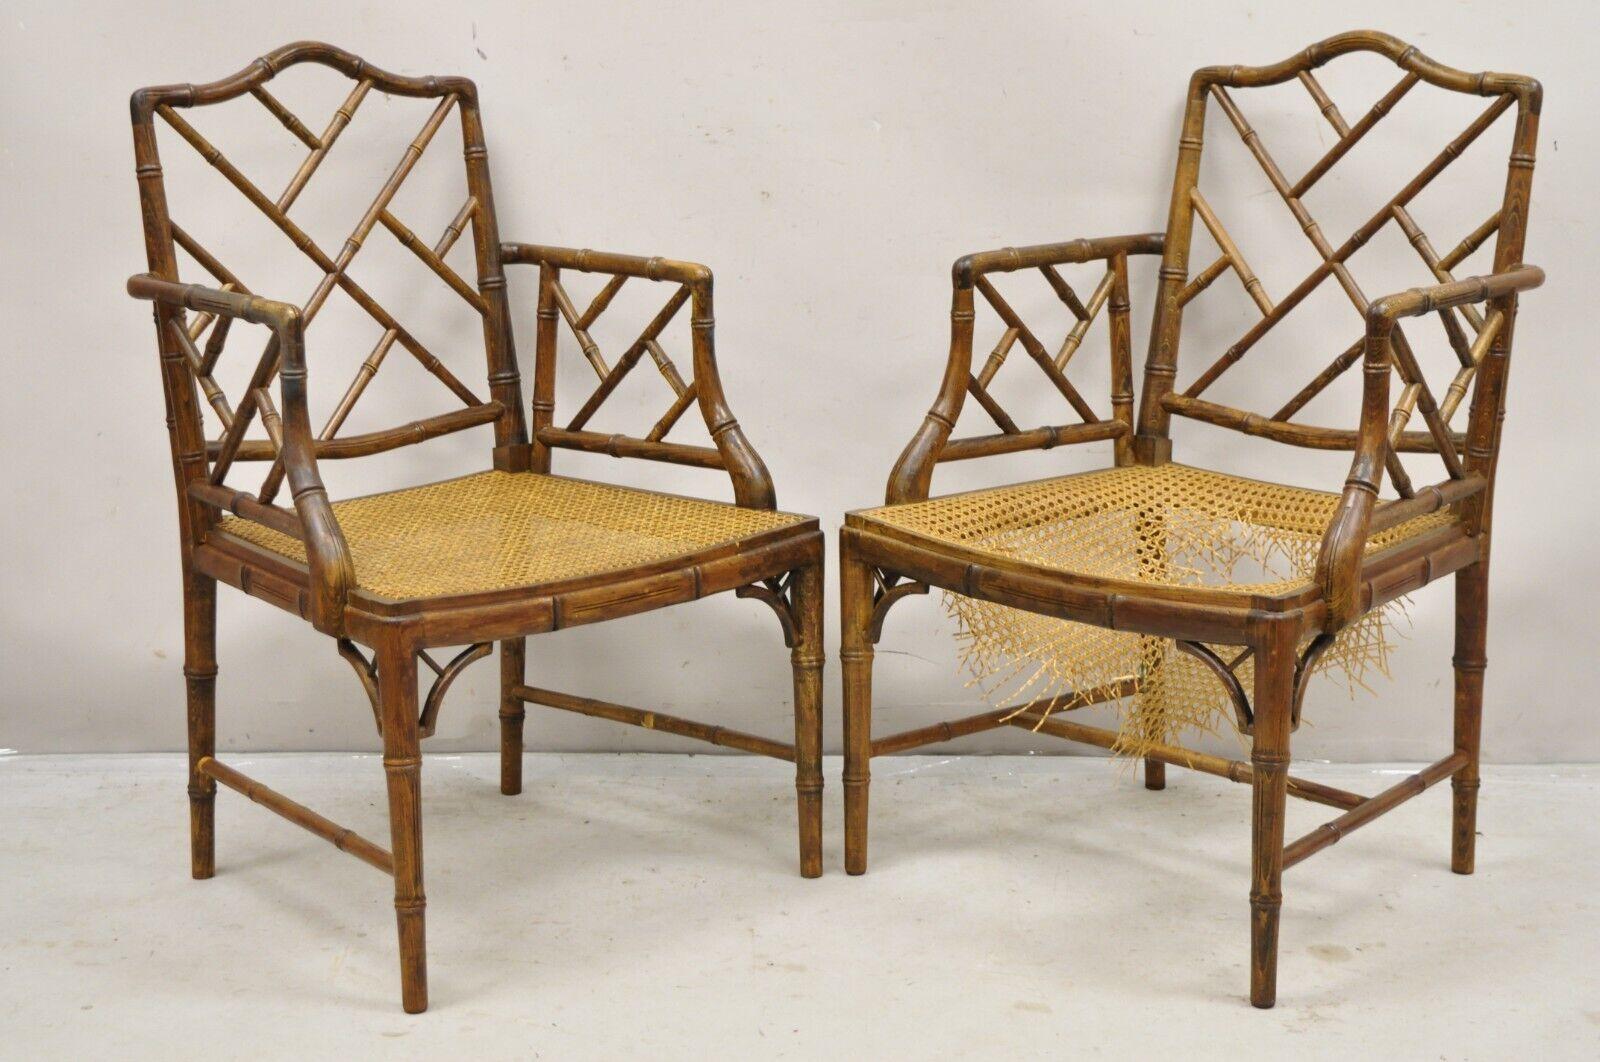 Chinese Chippendale Hollywood Regency Faux Bamboo Cane Dining Chairs - Set of 6 In Good Condition For Sale In Philadelphia, PA